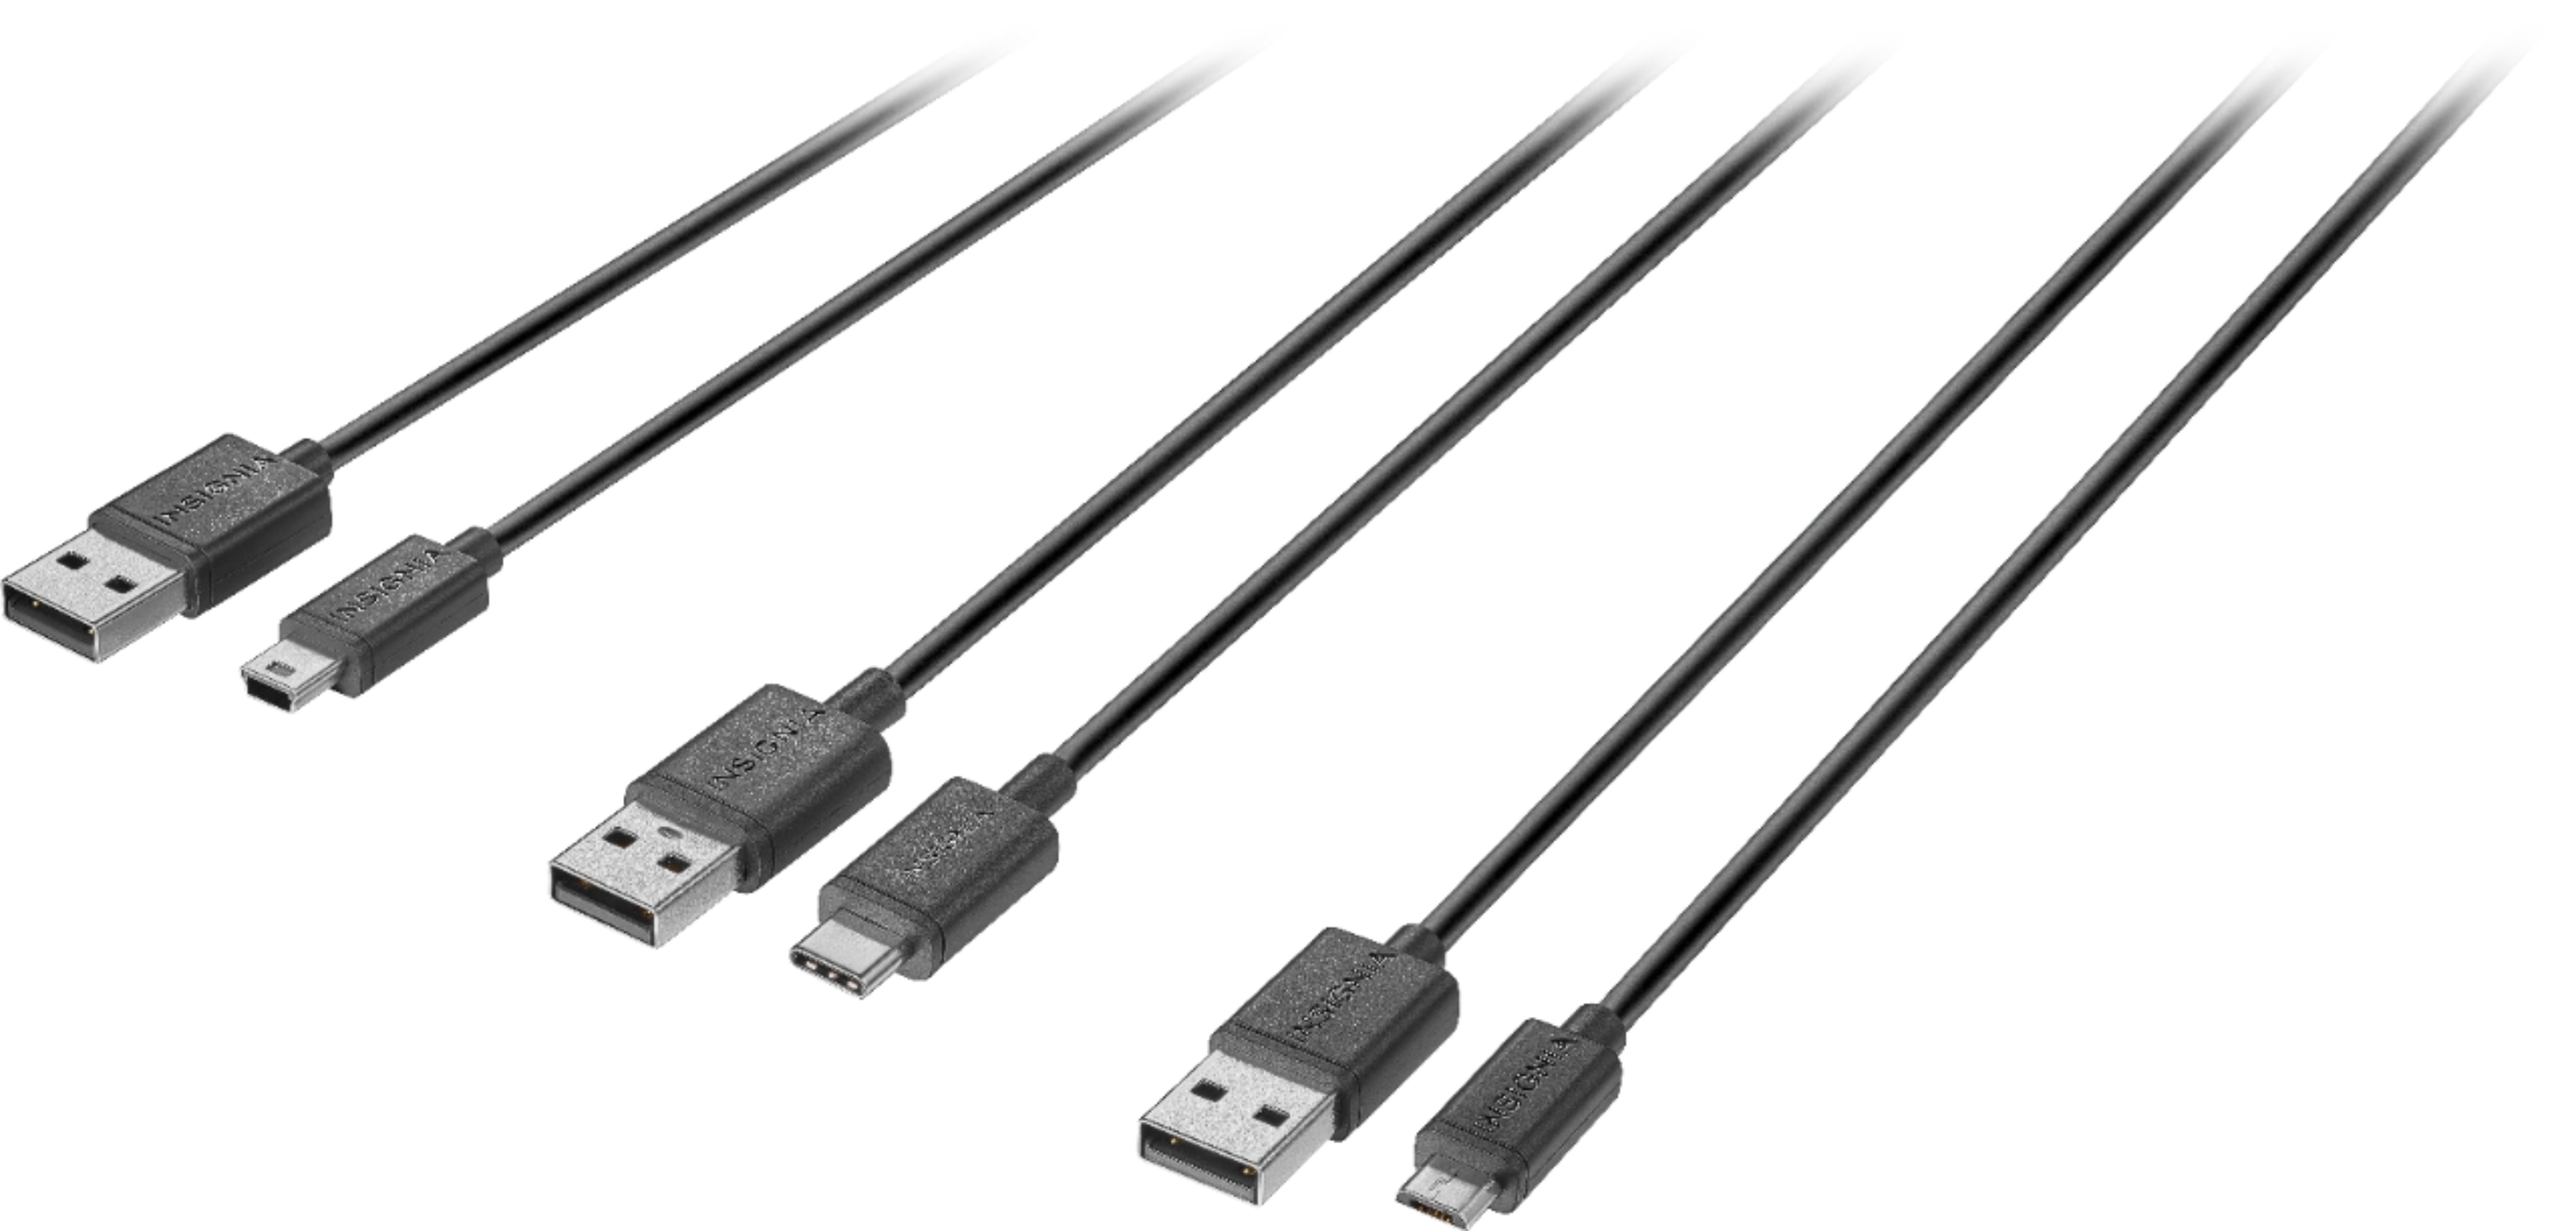 Insignia™ - 4' USB Mini, Micro, and Type-C Cable Pack (3-Pack) - Black